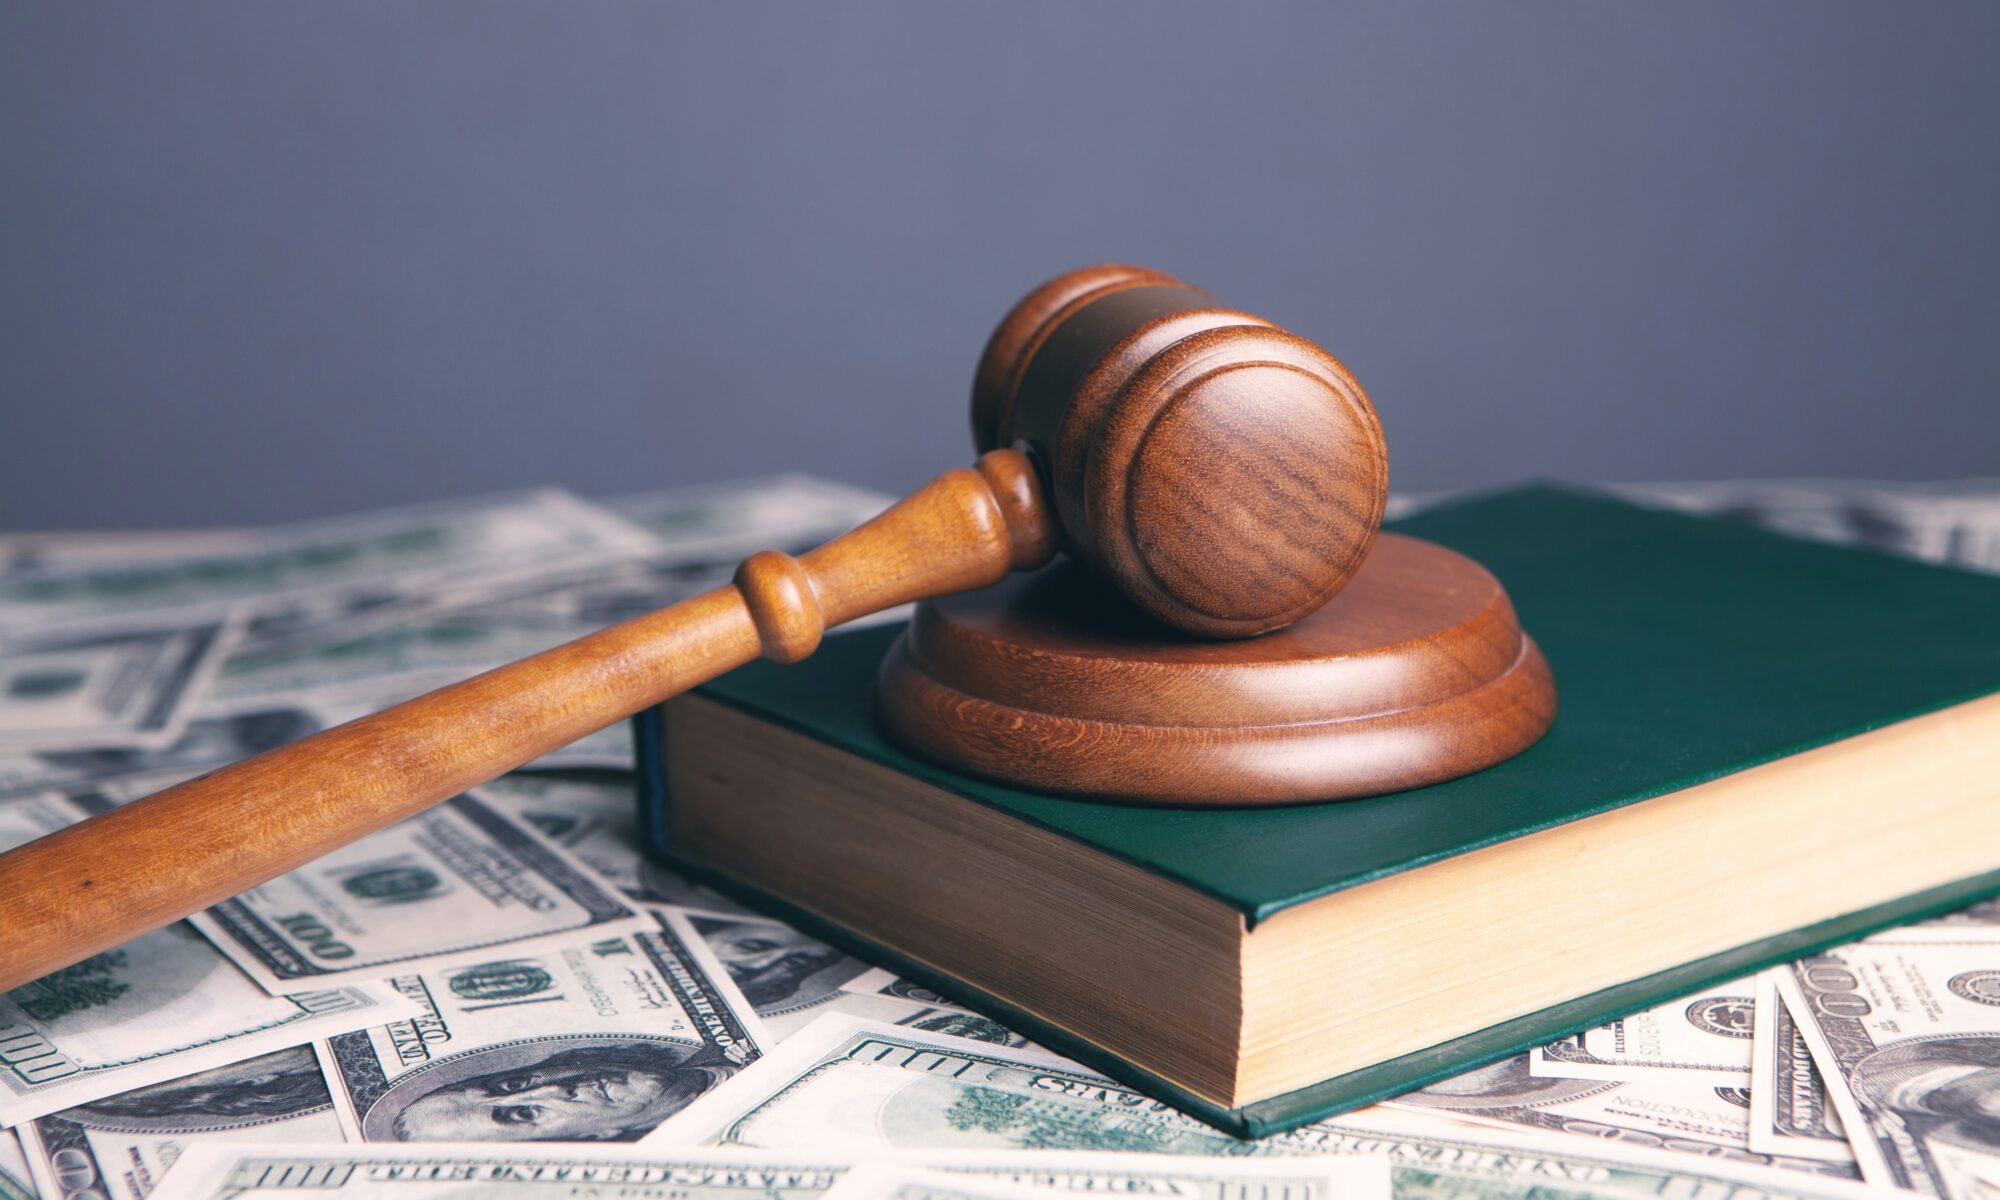 wooden gavel on top of book with money beneath